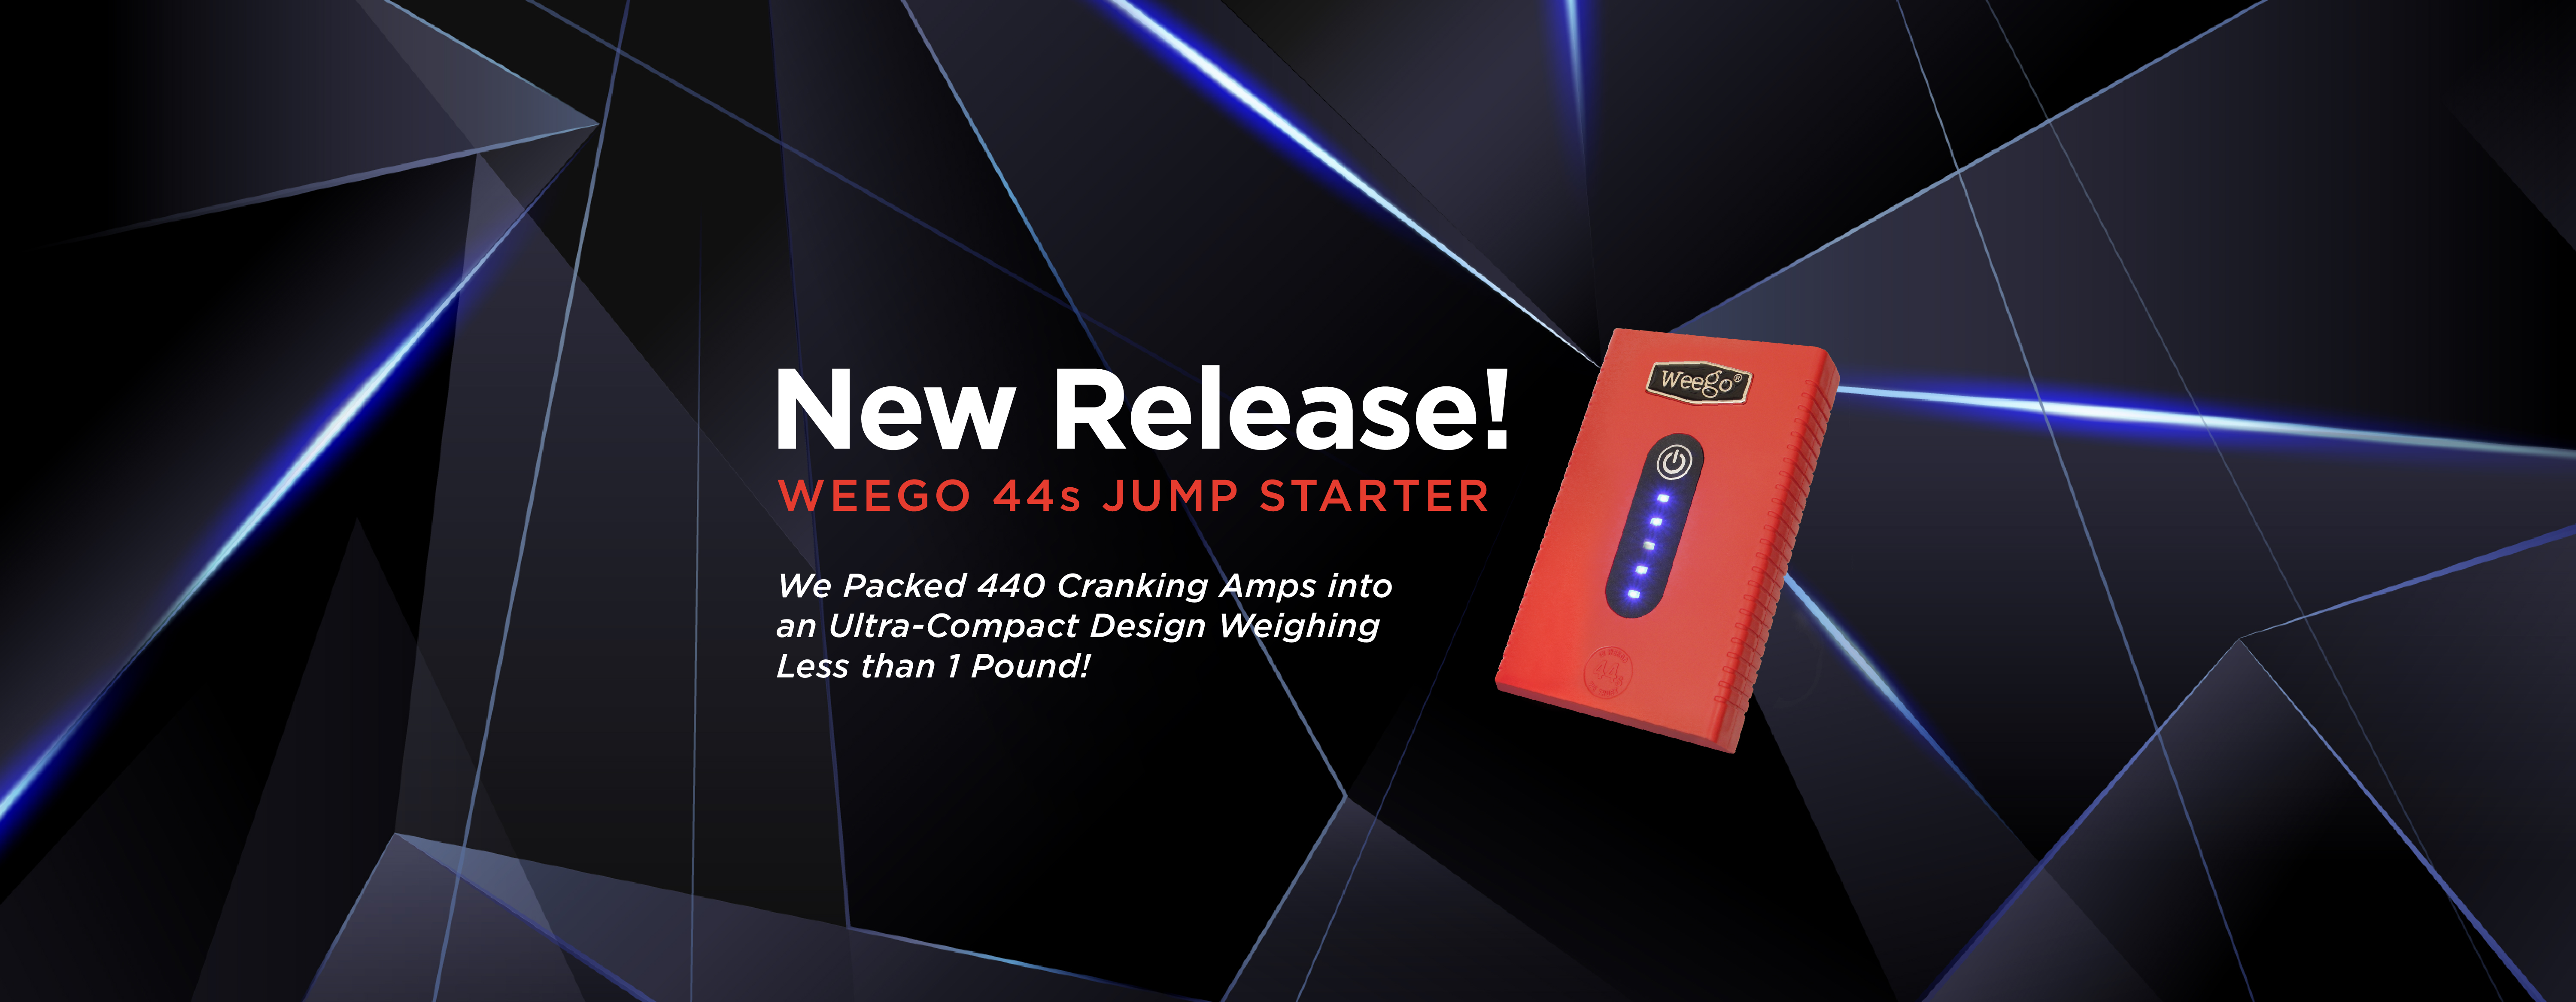 Weego's Newest Jump Starter - 44s - 440 Cranking Amps in an Ultra Compact Design Weighing Less Than 1 Pound